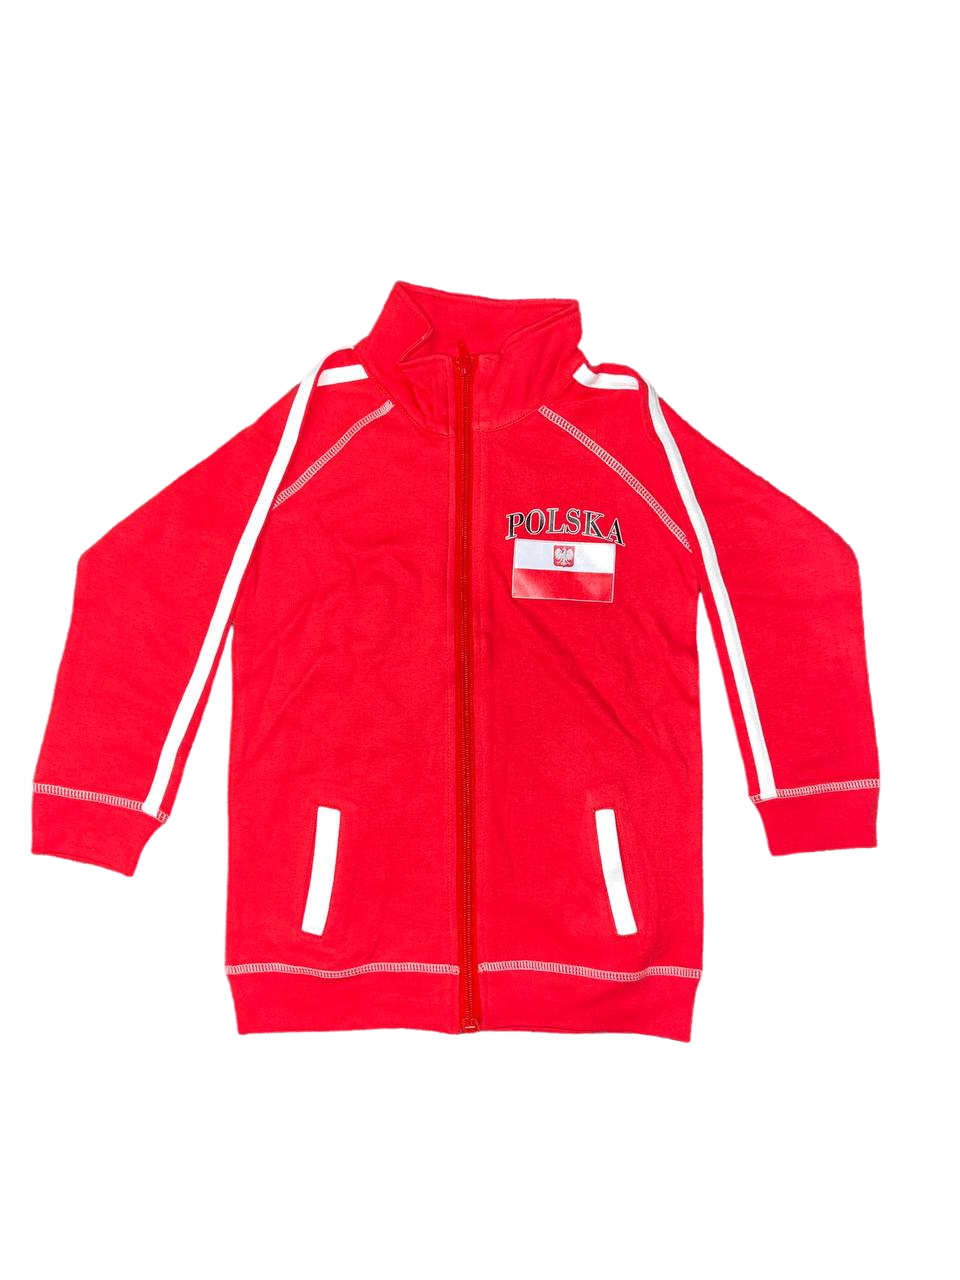 Kids Polish Jacket Red With Flag White Straps on Sleeves